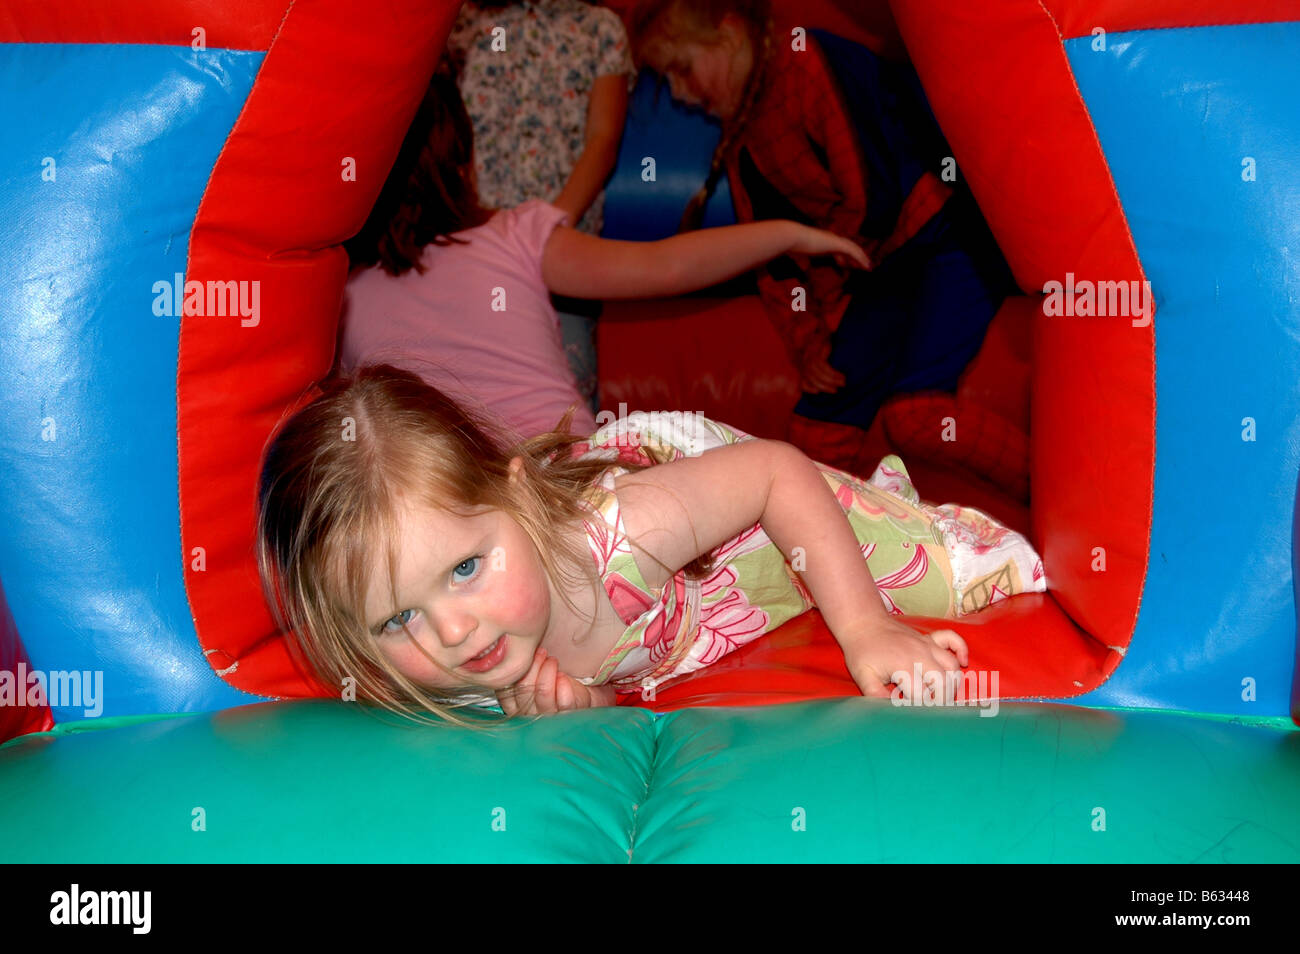 Children play on a bouncy castle. Stock Photo